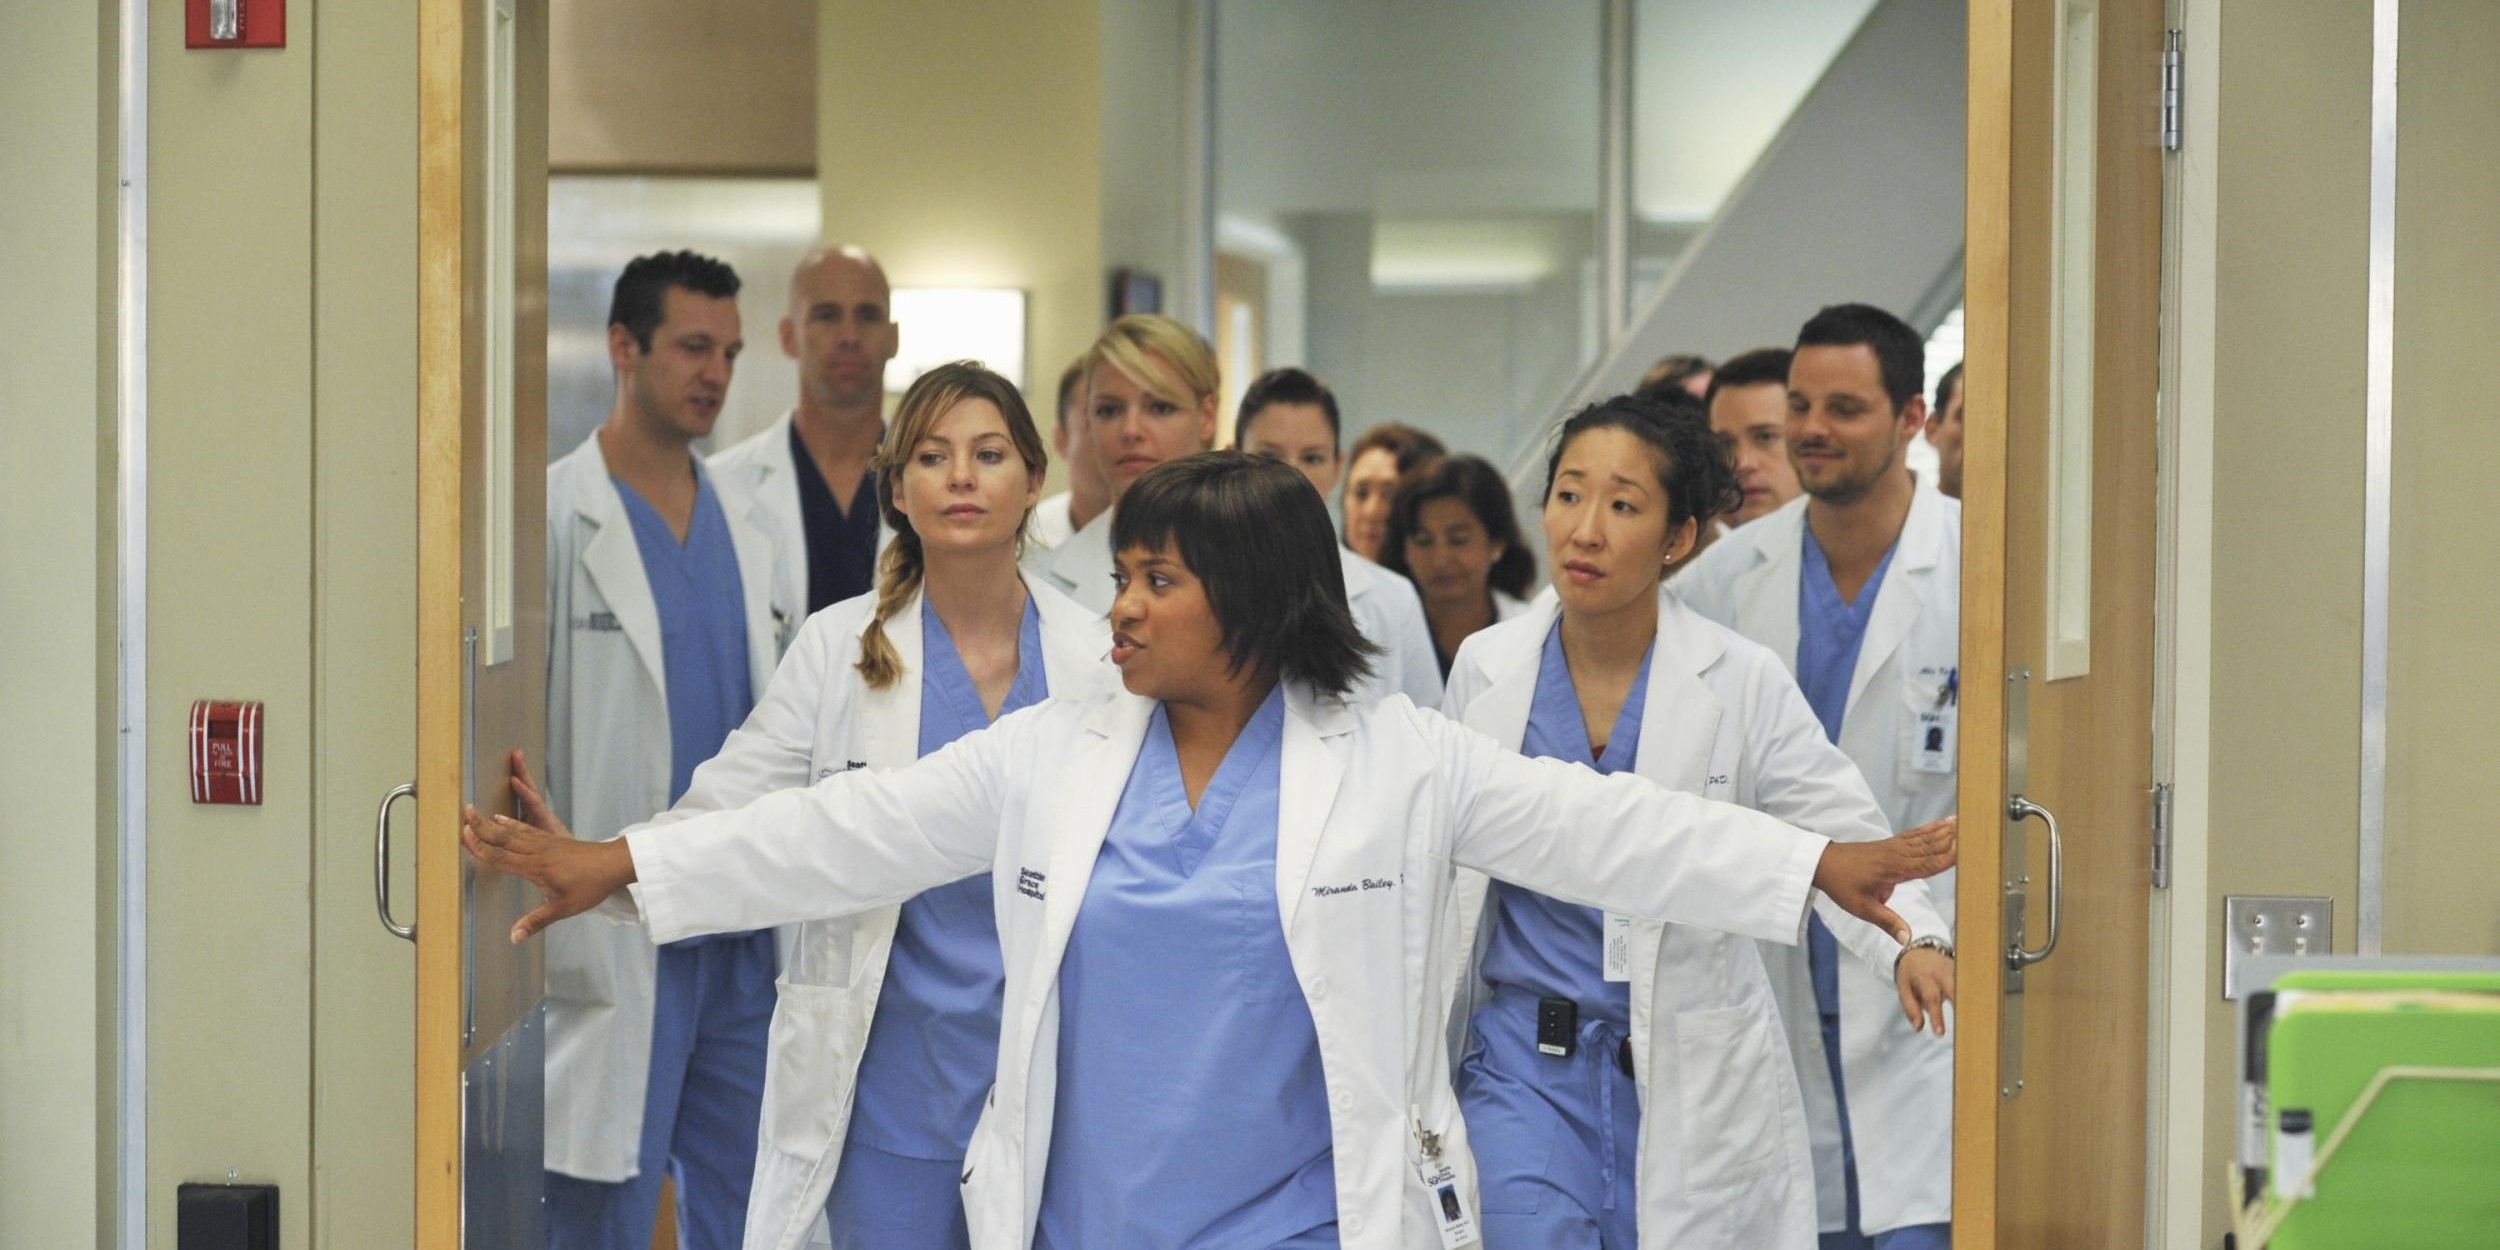 Grey's Anatomy residents working extremely long hours.